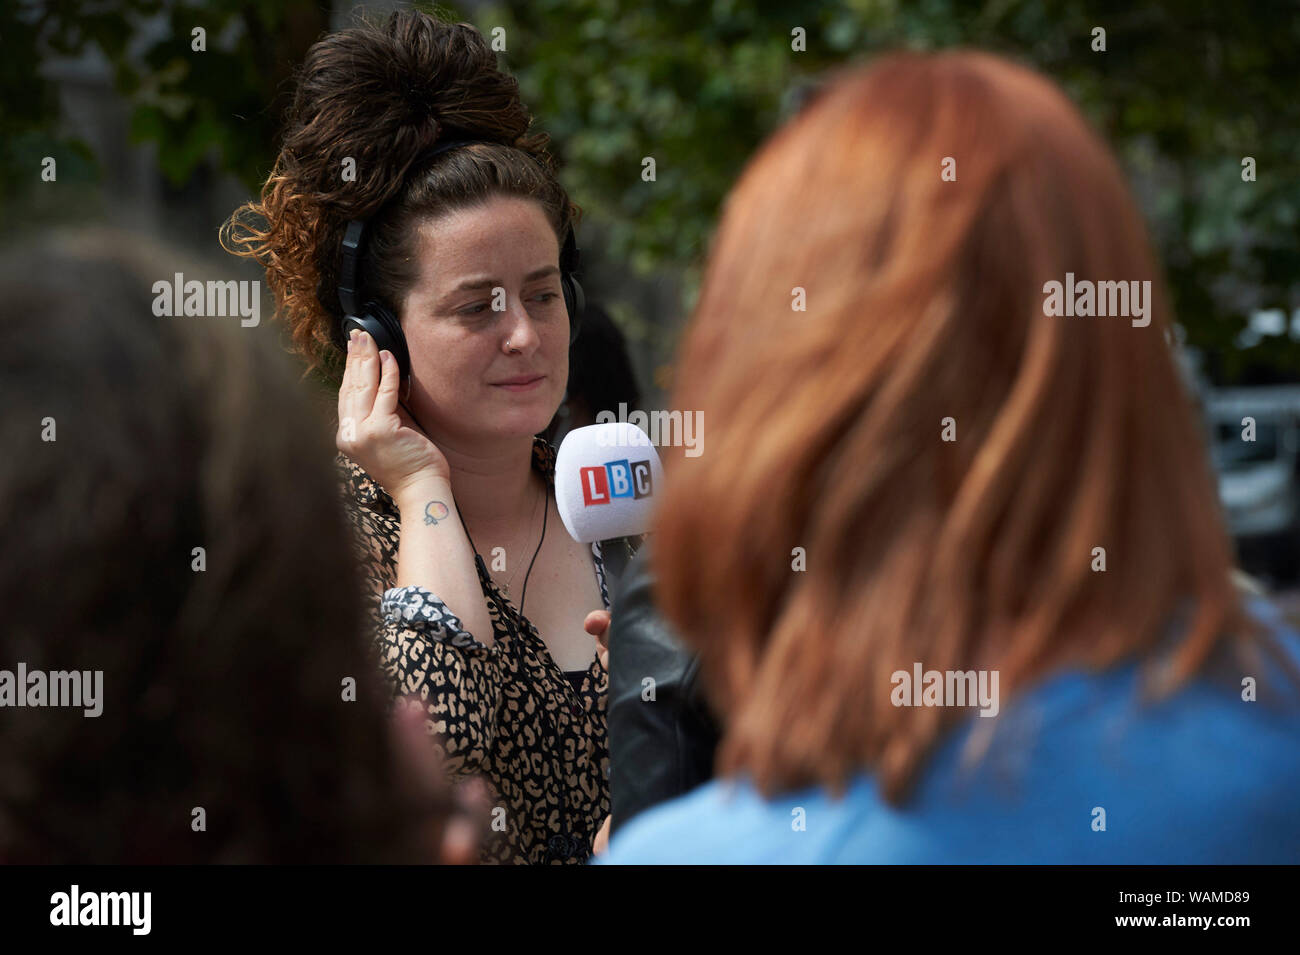 Royal Courts of Justice, London, UK. 21st August, 2019.  Ealing Council’s safe zone upheld after Court of Appeal hearing at the Royal Courts of Justice. Eve Veglio-White, sister supporter activist, interviewed after the hearing. Credit: Thomas Bowles/ Alamy Live News Stock Photo